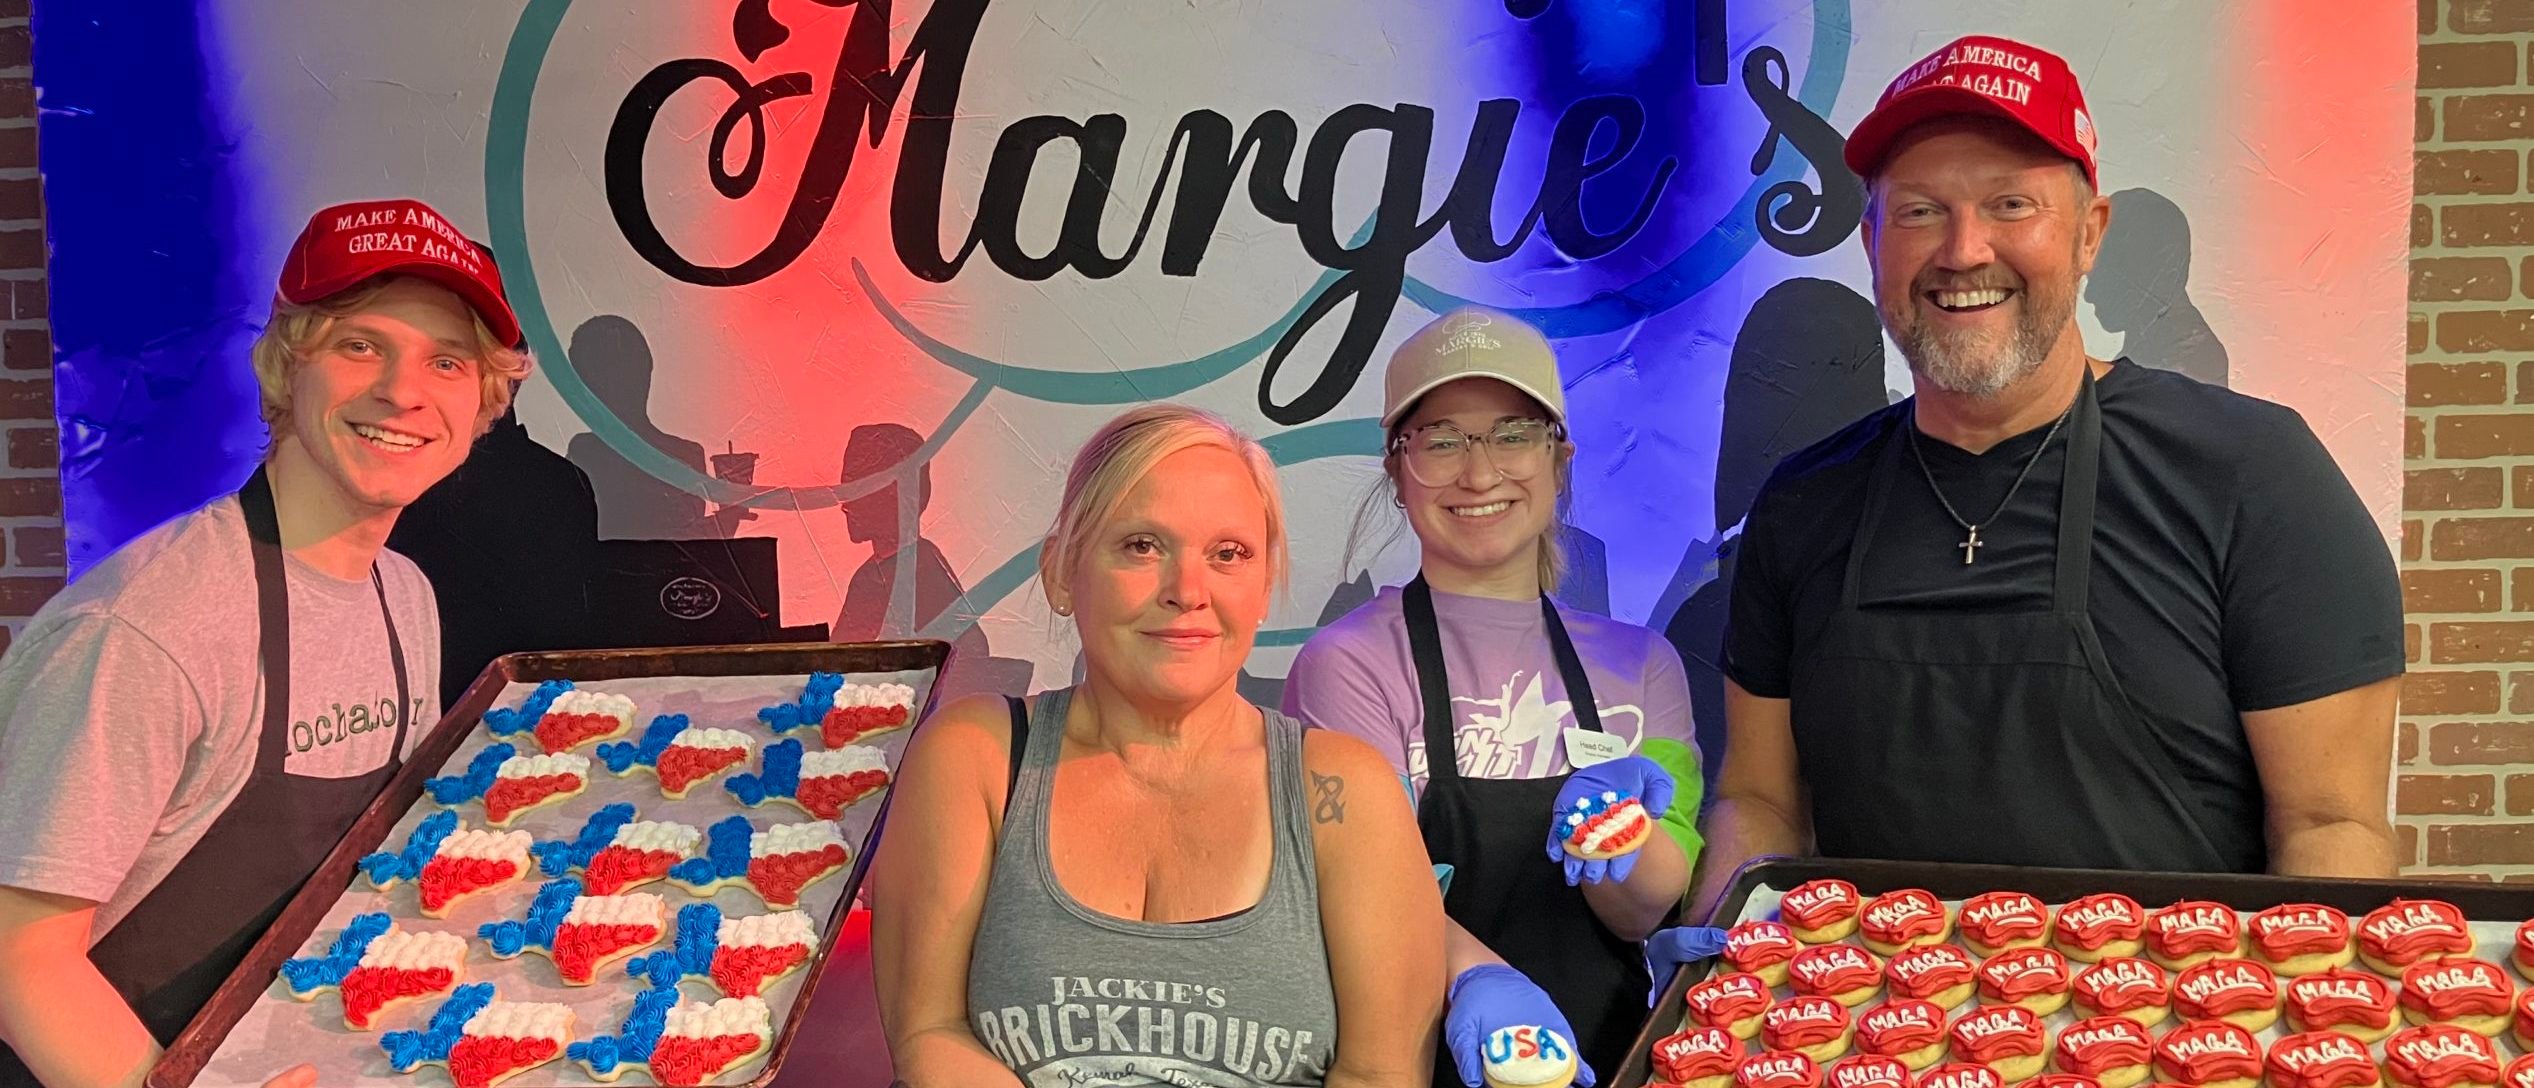 Employees of Margie's Bakery & Deli pose with their cookies in MAGA hats.